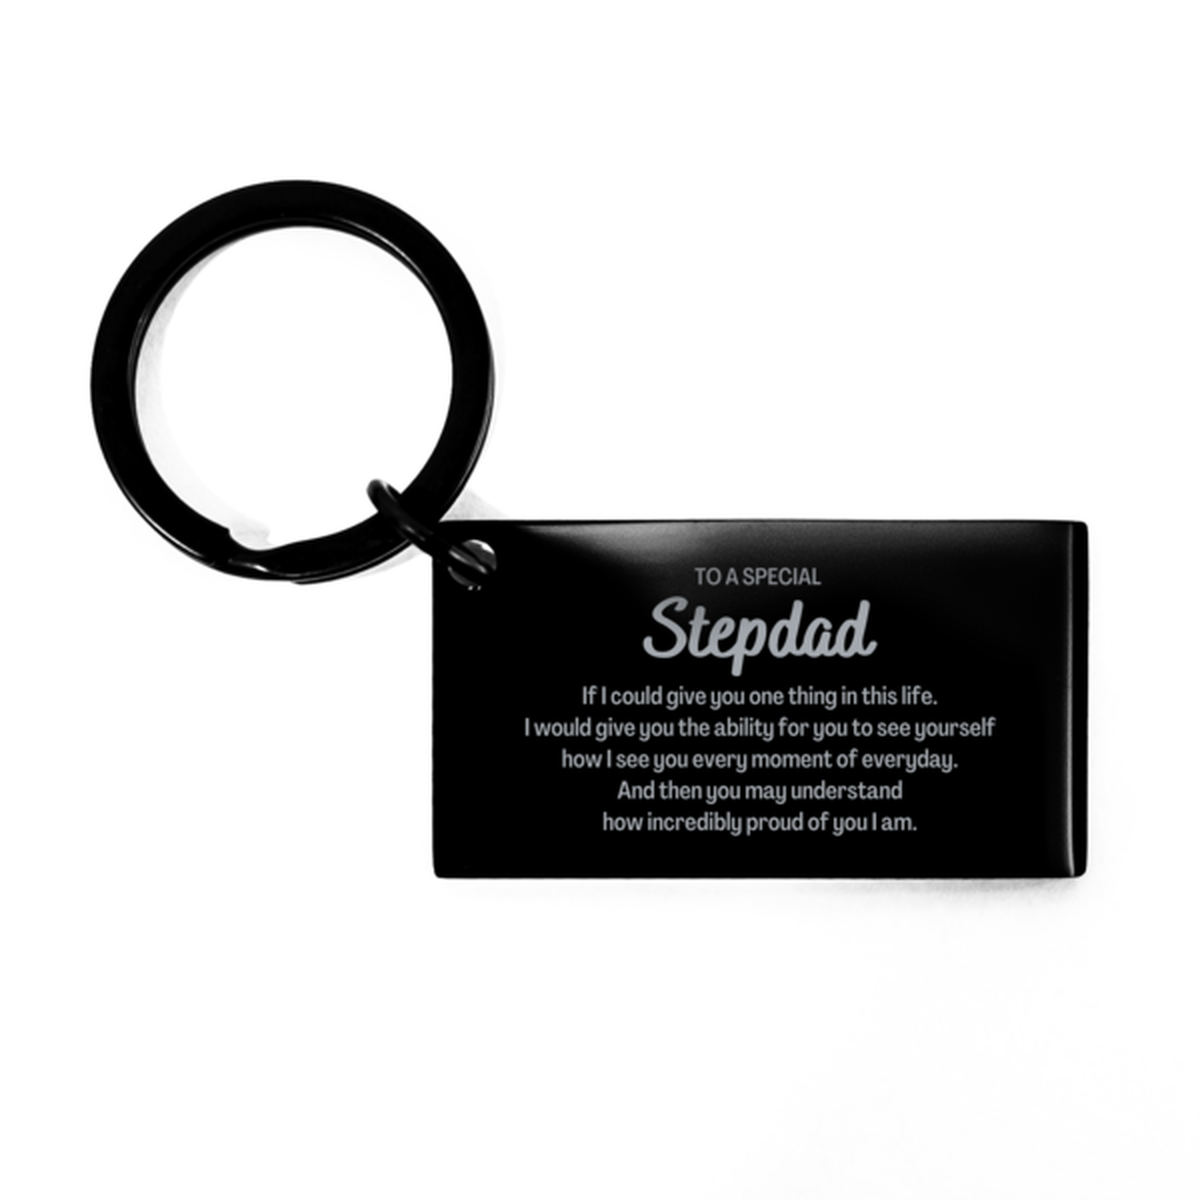 To My Stepdad Keychain, Gifts For Stepdad Engraved, Inspirational Gifts for Christmas Birthday, Epic Gifts for Stepdad To A Special Stepdad how incredibly proud of you I am